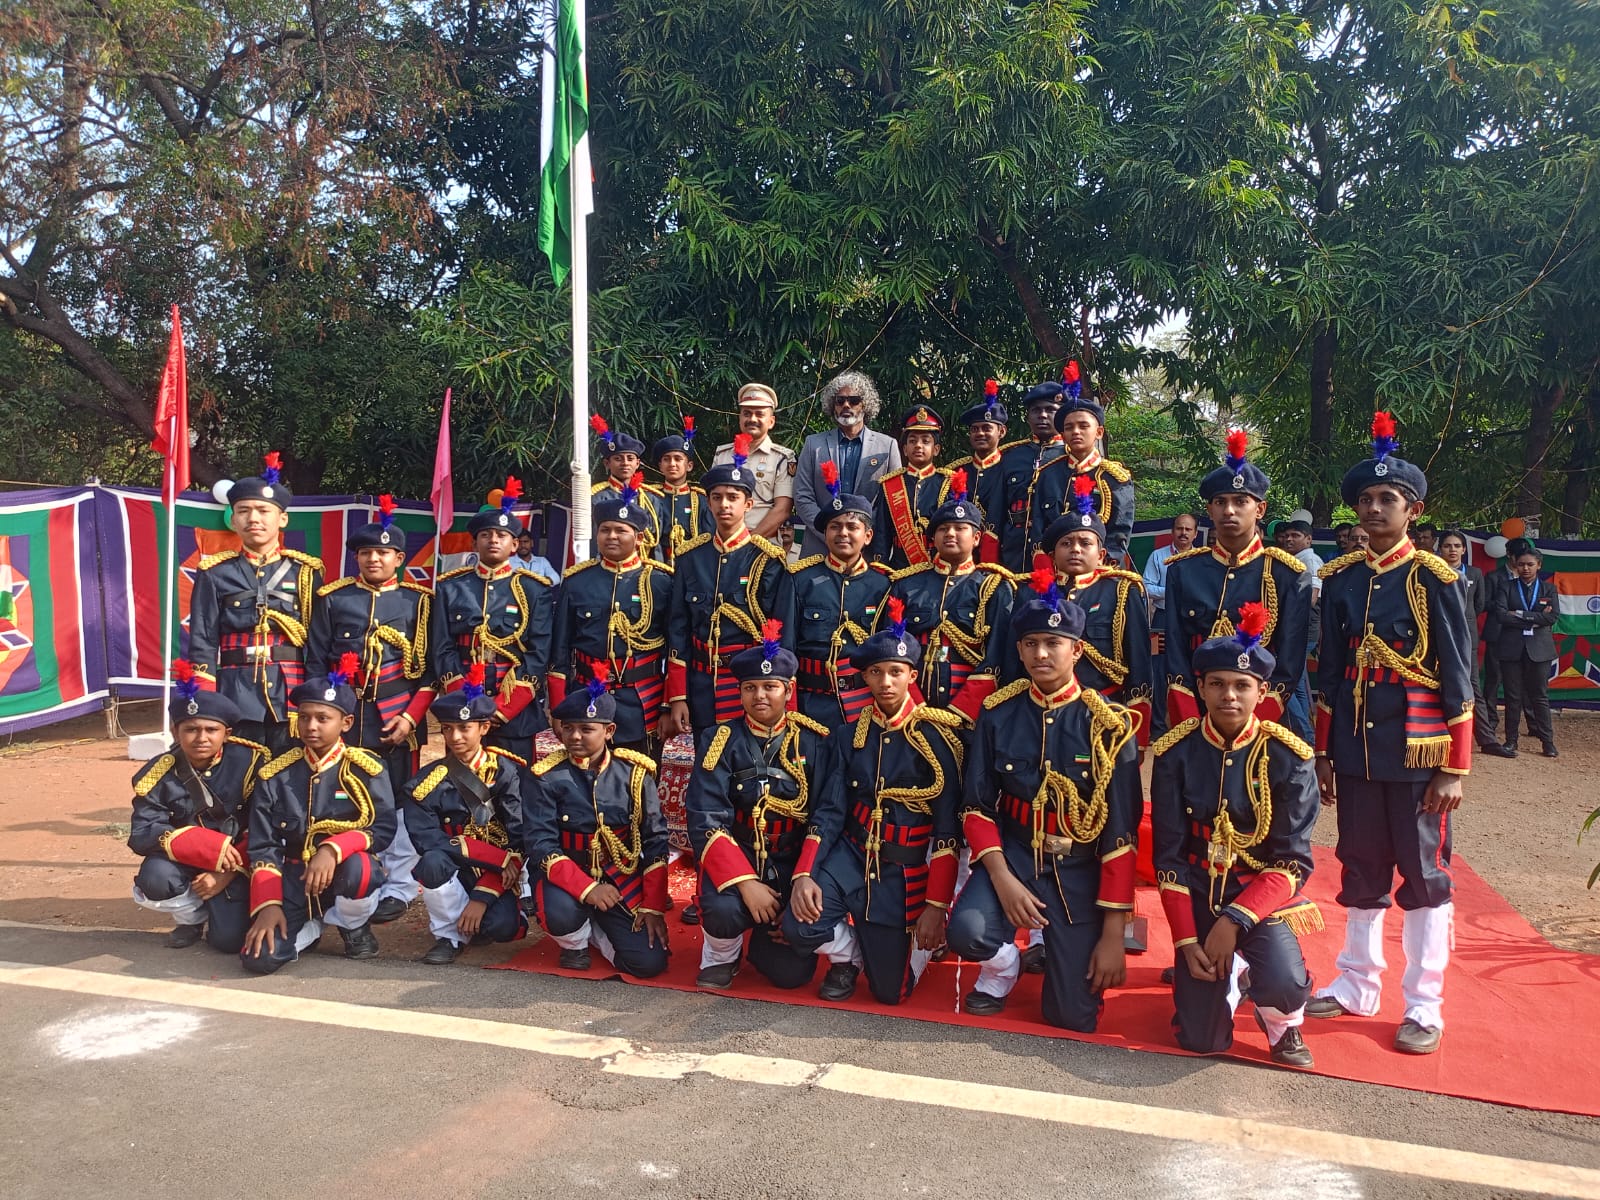 Our Band team performance -Republic Day celebration organised by Airport Authority of India.